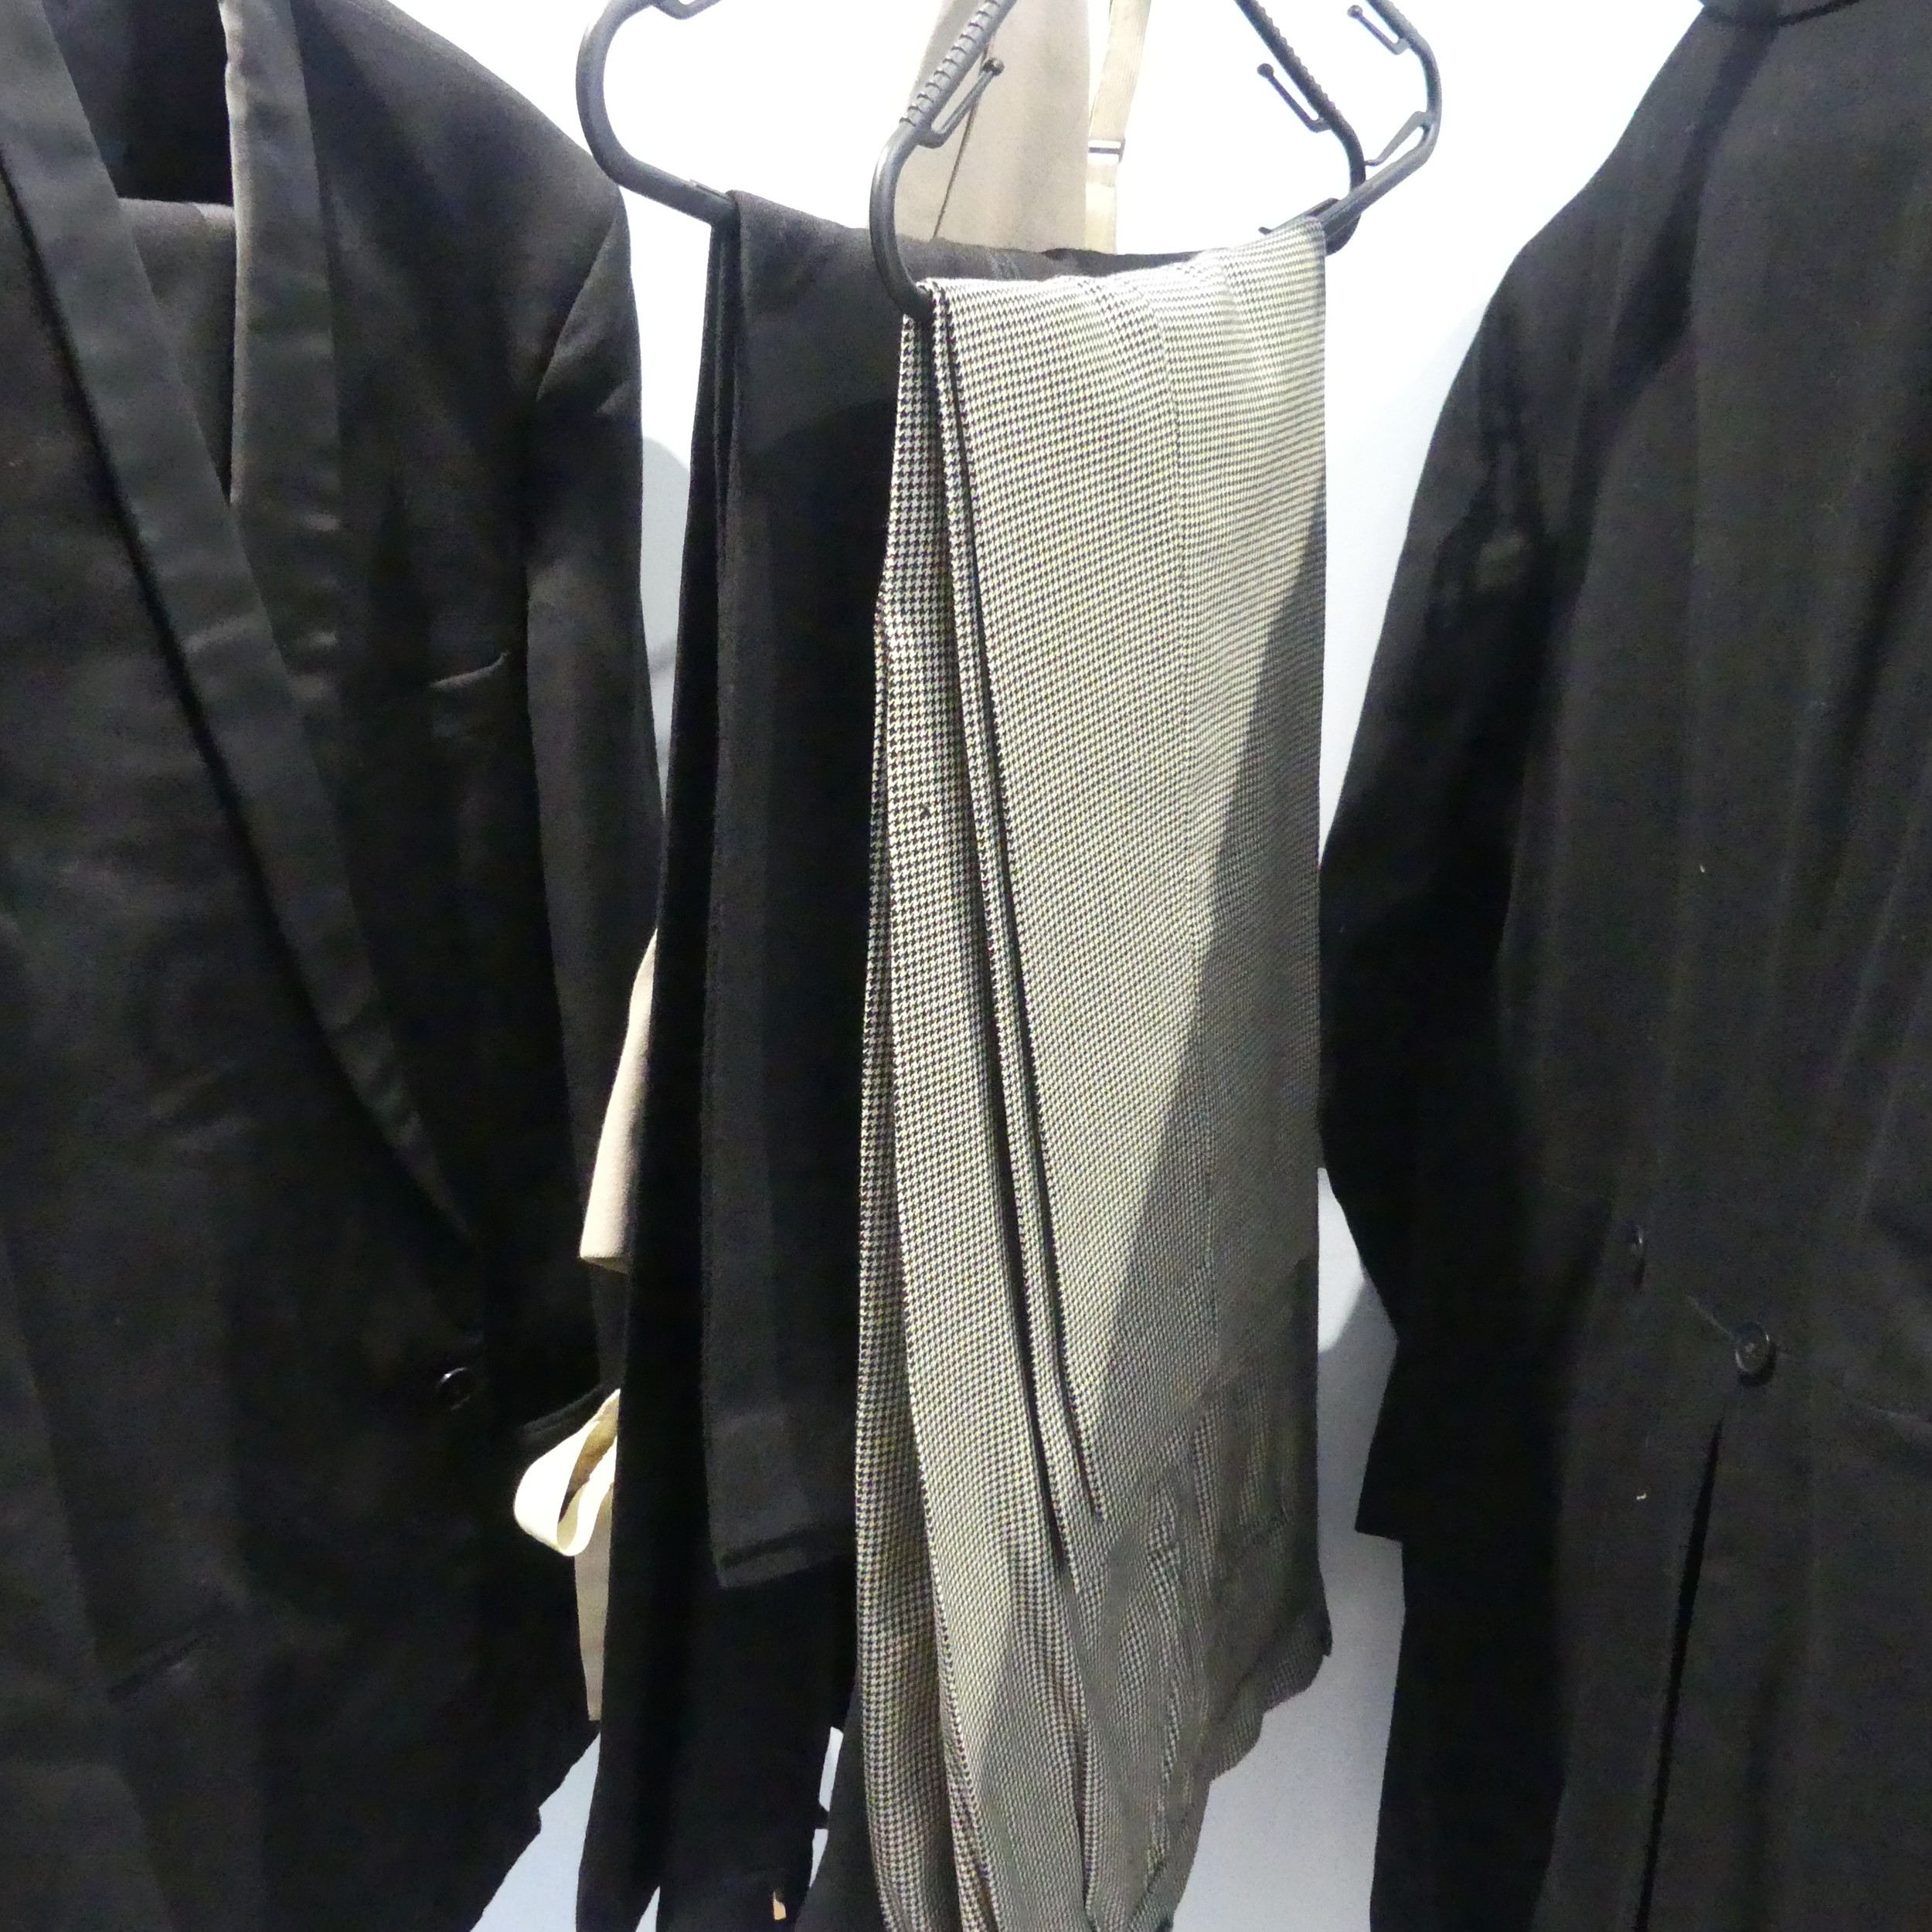 Bespoke Tailoring: early and mid 20th century Men's formal Evening Dress, including three tailcoats, - Image 5 of 6